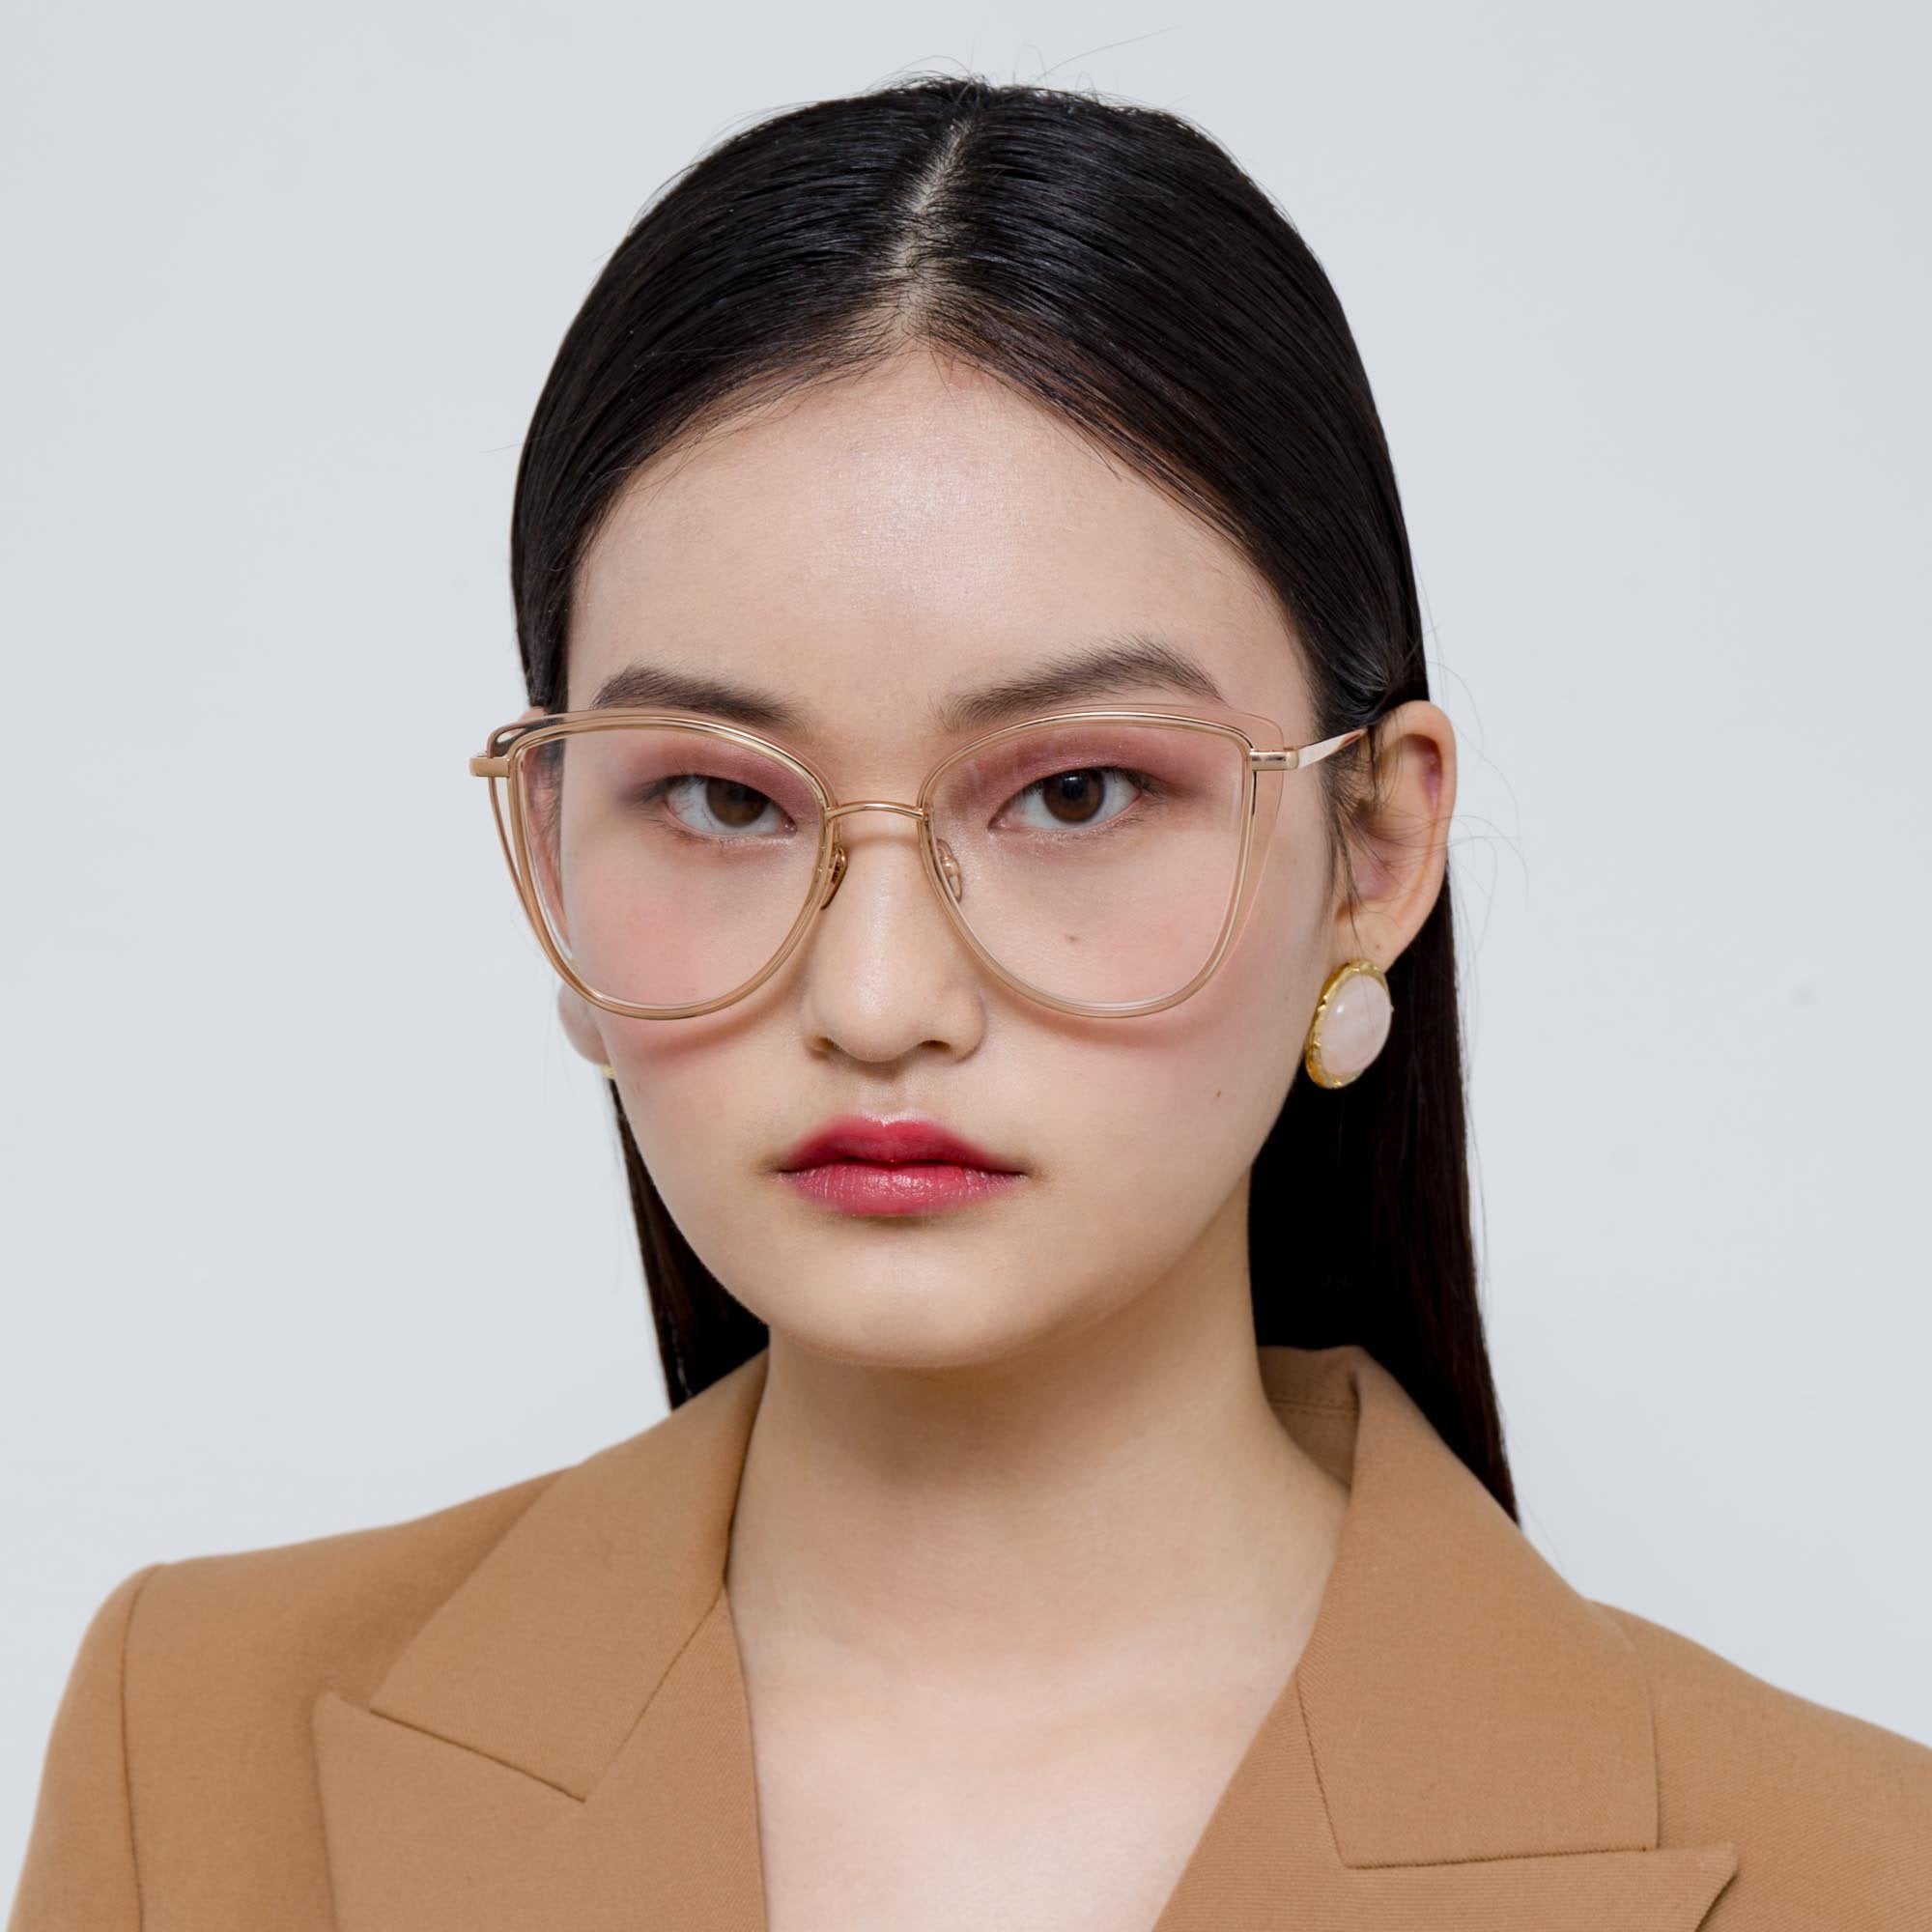 Color_LFL1109C5OPT - Liza Cat Eye Optical Frame in Ash and Rose Gold